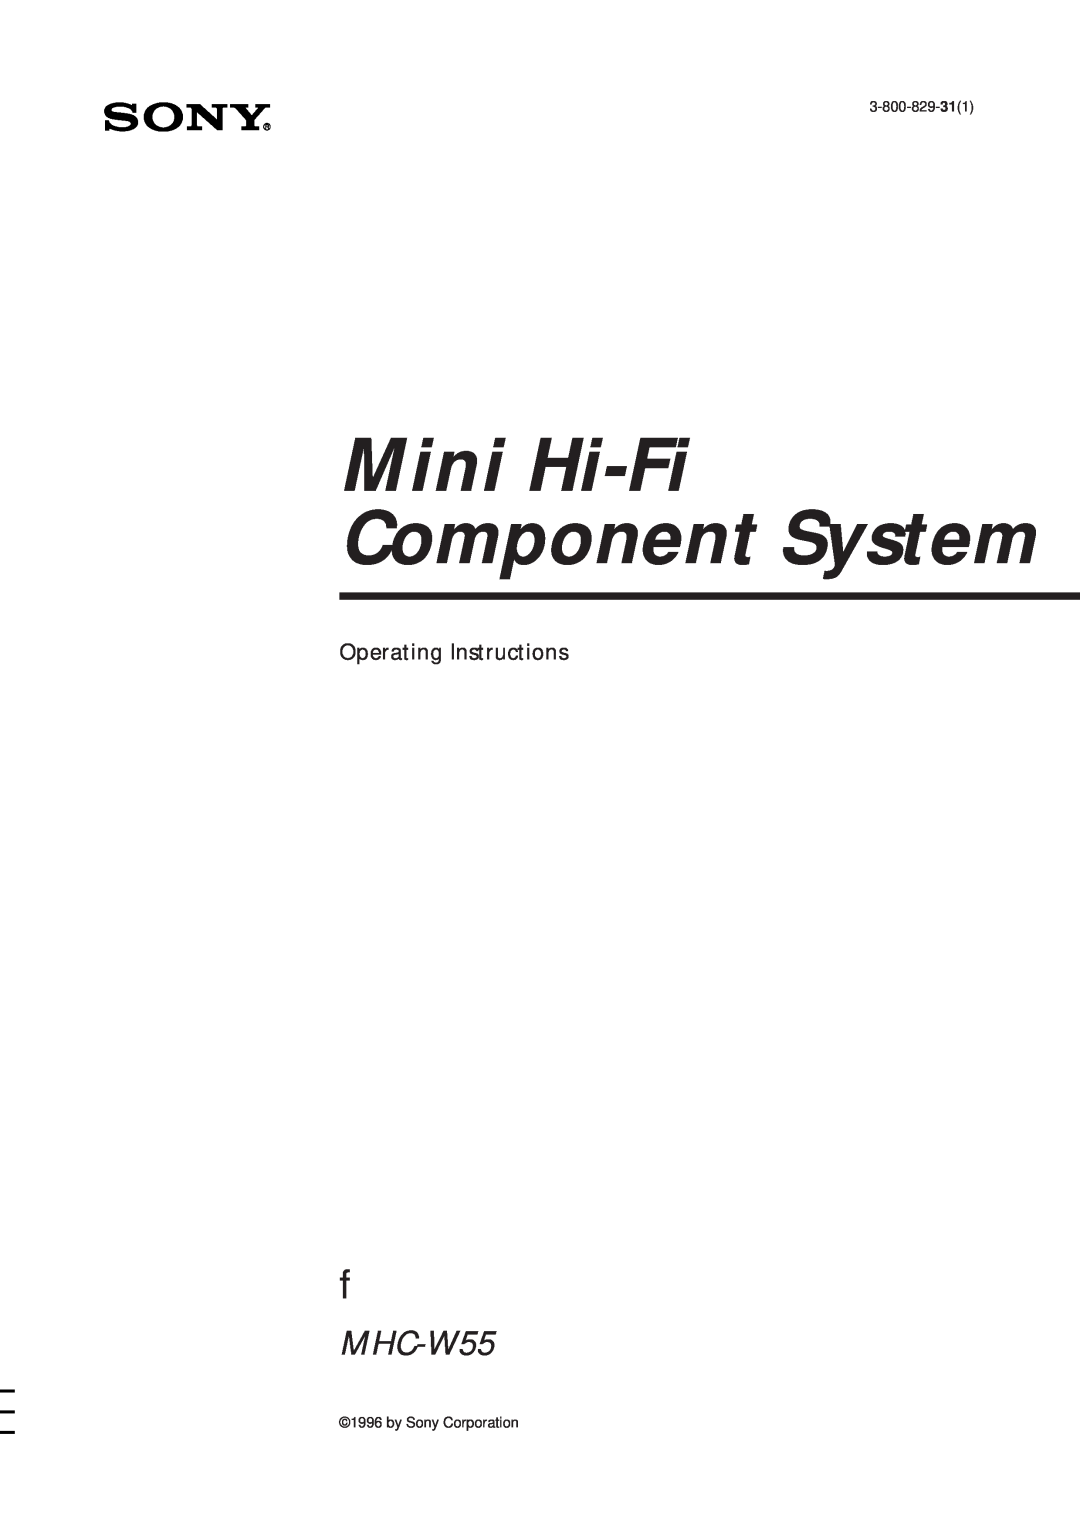 Sony MHC-W55 manual Mini Hi-FiComponent System, Operating Instructions, 3-800-829-311, by Sony Corporation 